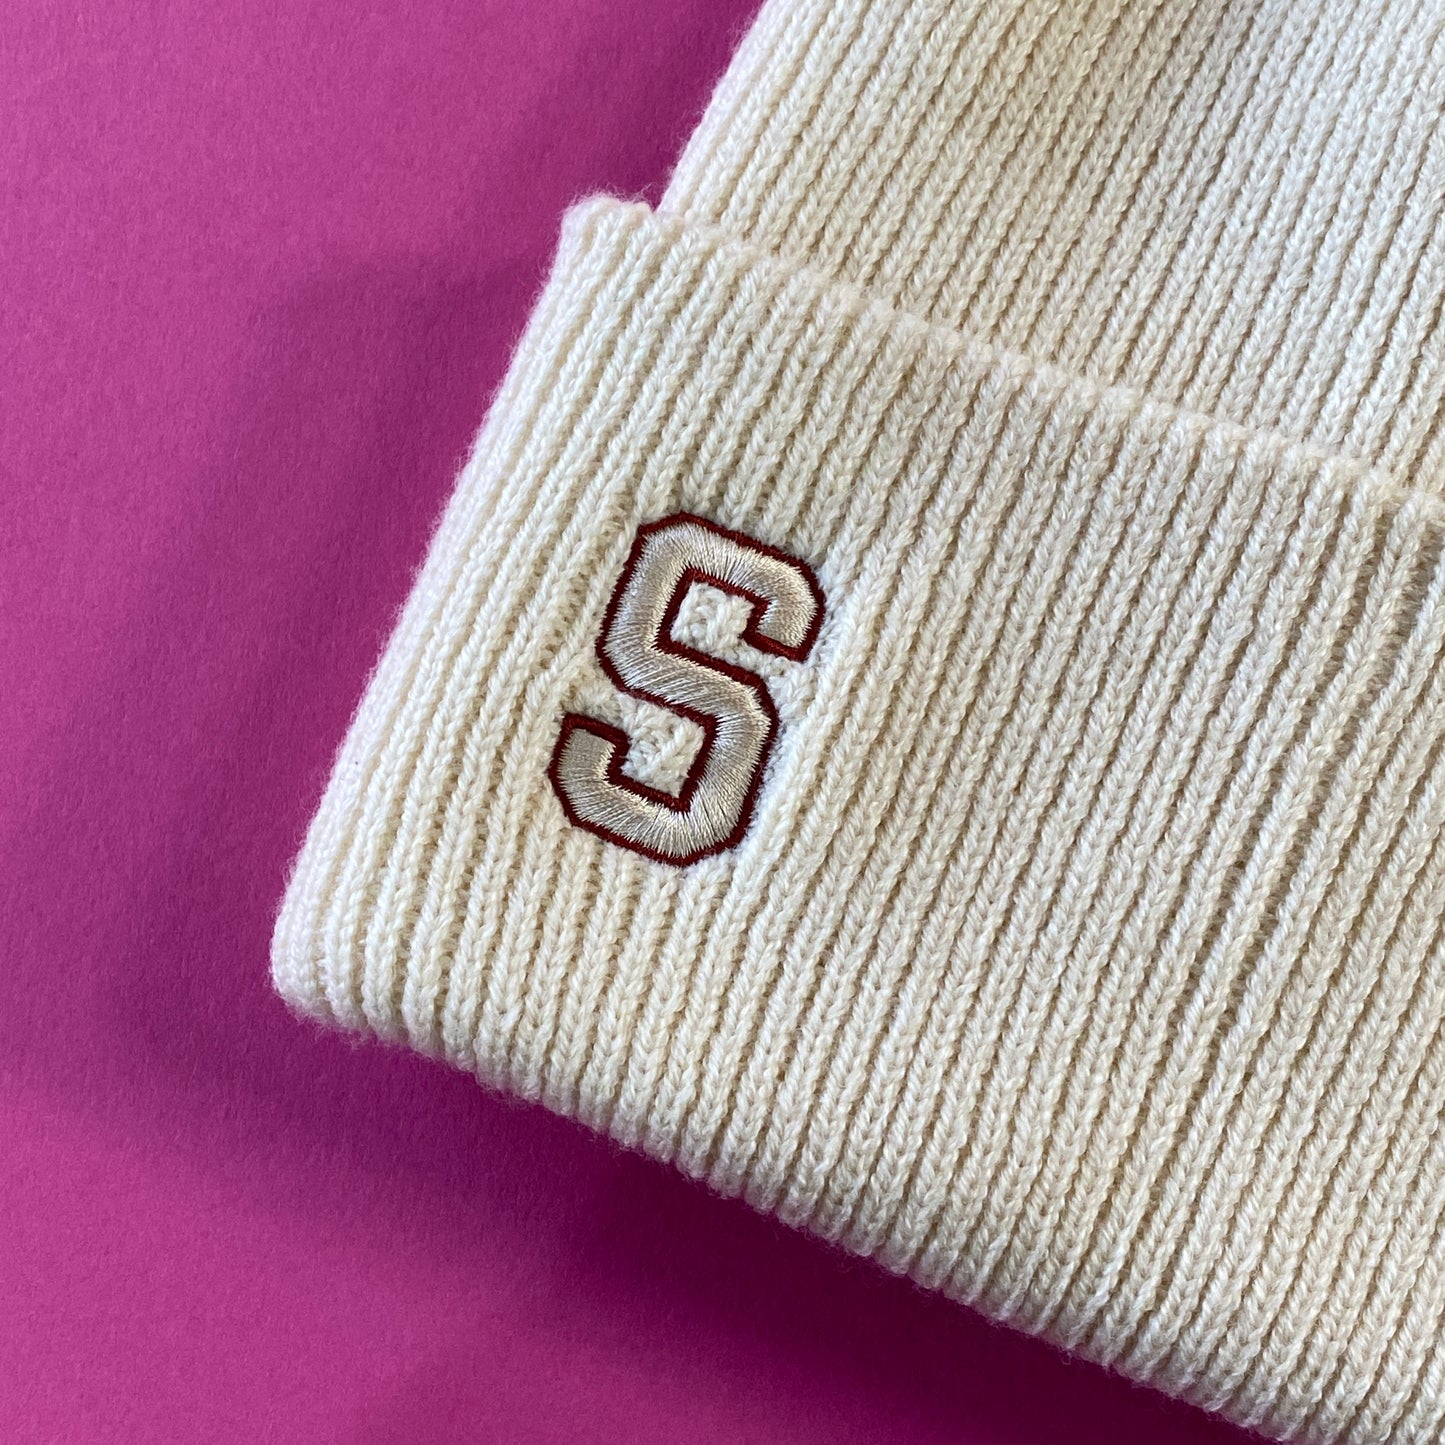 Personalised Embroidered Initial 'College' Beanie Hat with Deep Cuff